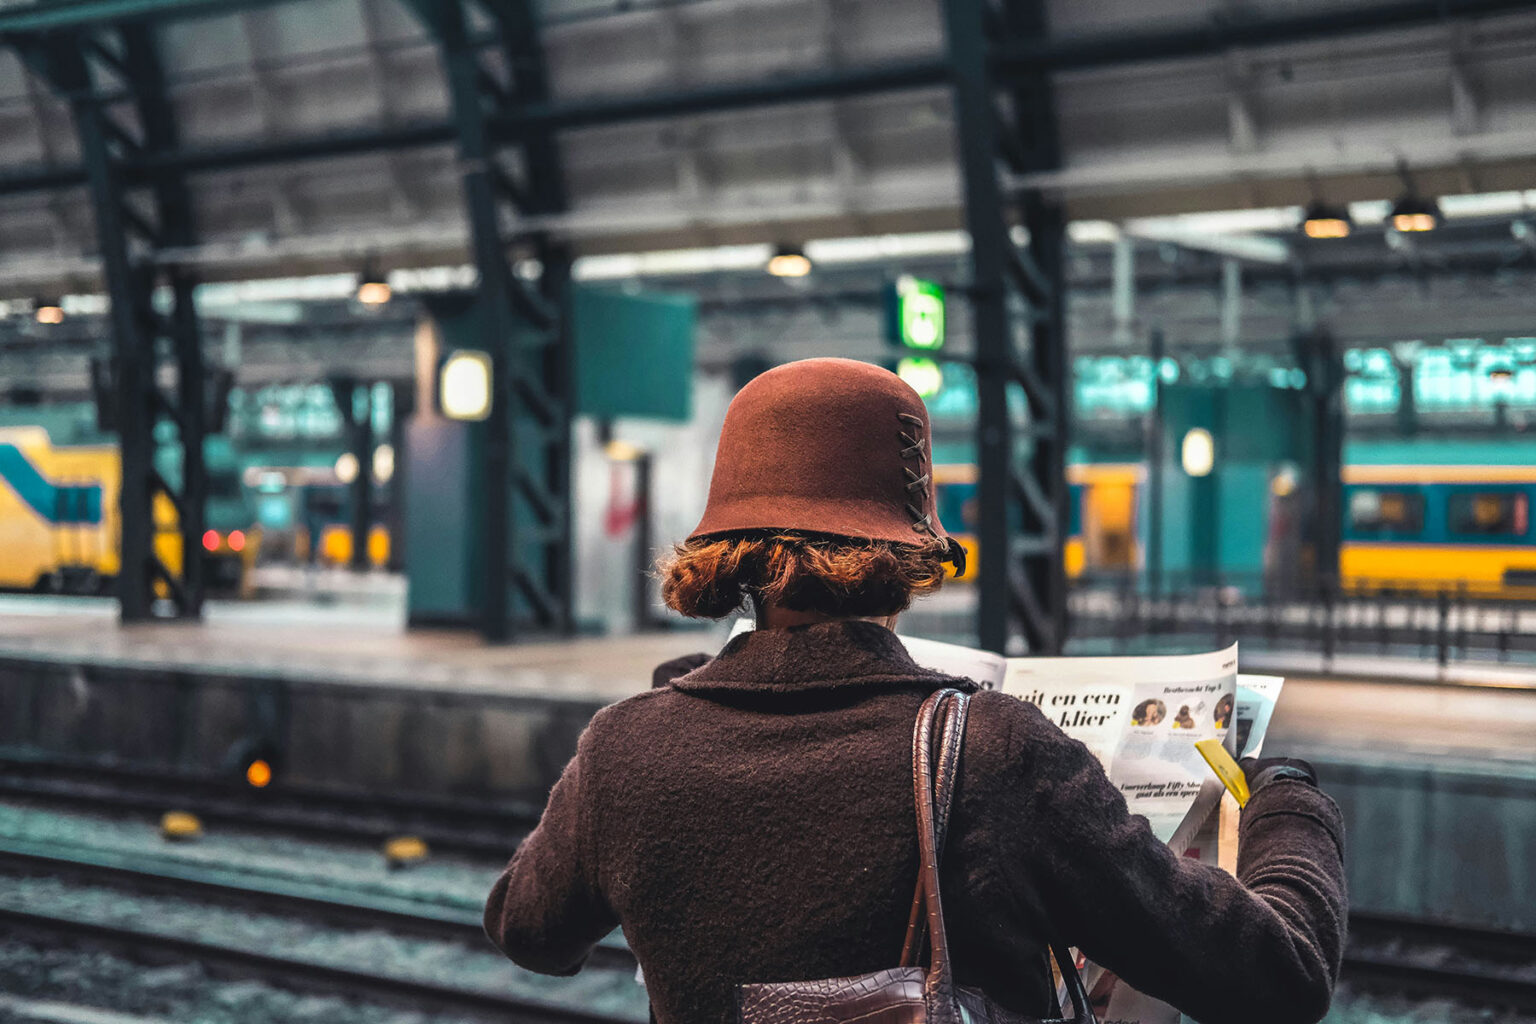 Woman with her back turned to the camera, reading a newspaper, while waiting on her train.